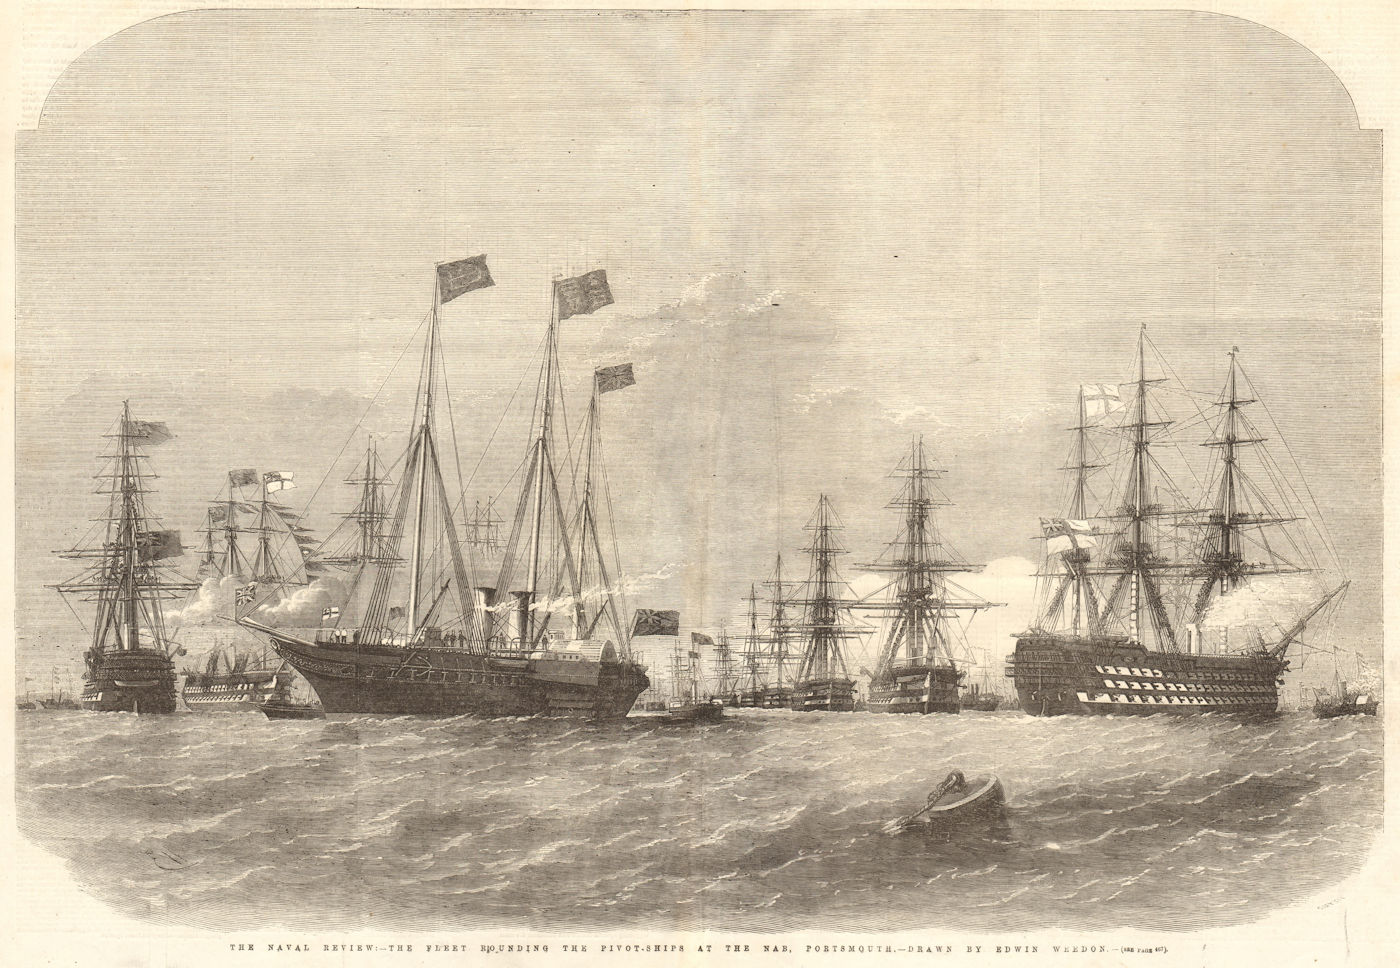 Associate Product The Naval Review: the fleet rounding the pivot-ships at the Nab, Portsmouth 1856